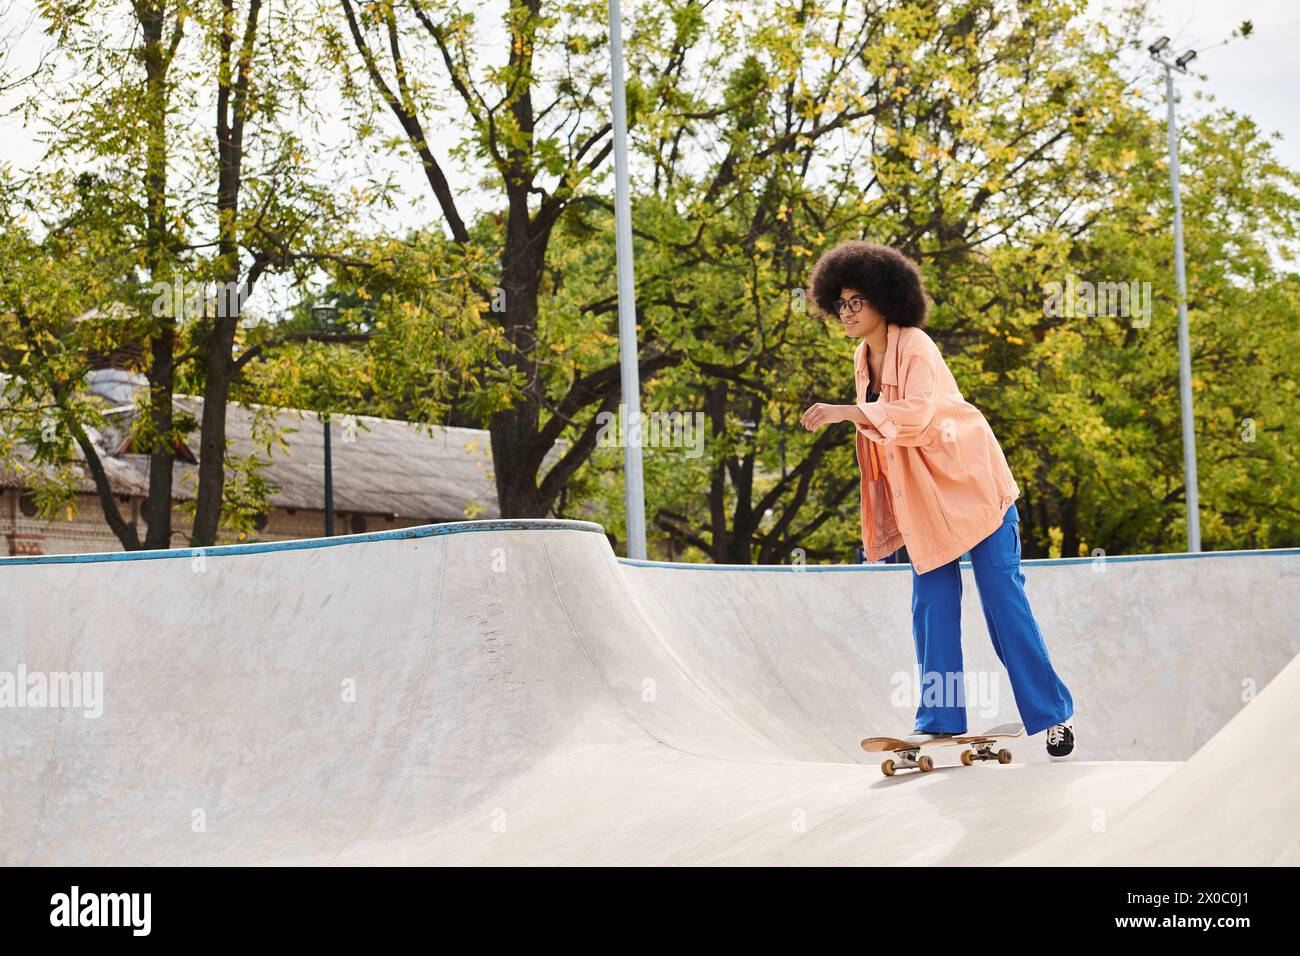 A young African American woman with curly hair skillfully riding a skateboard at a vibrant skate park. Stock Photo